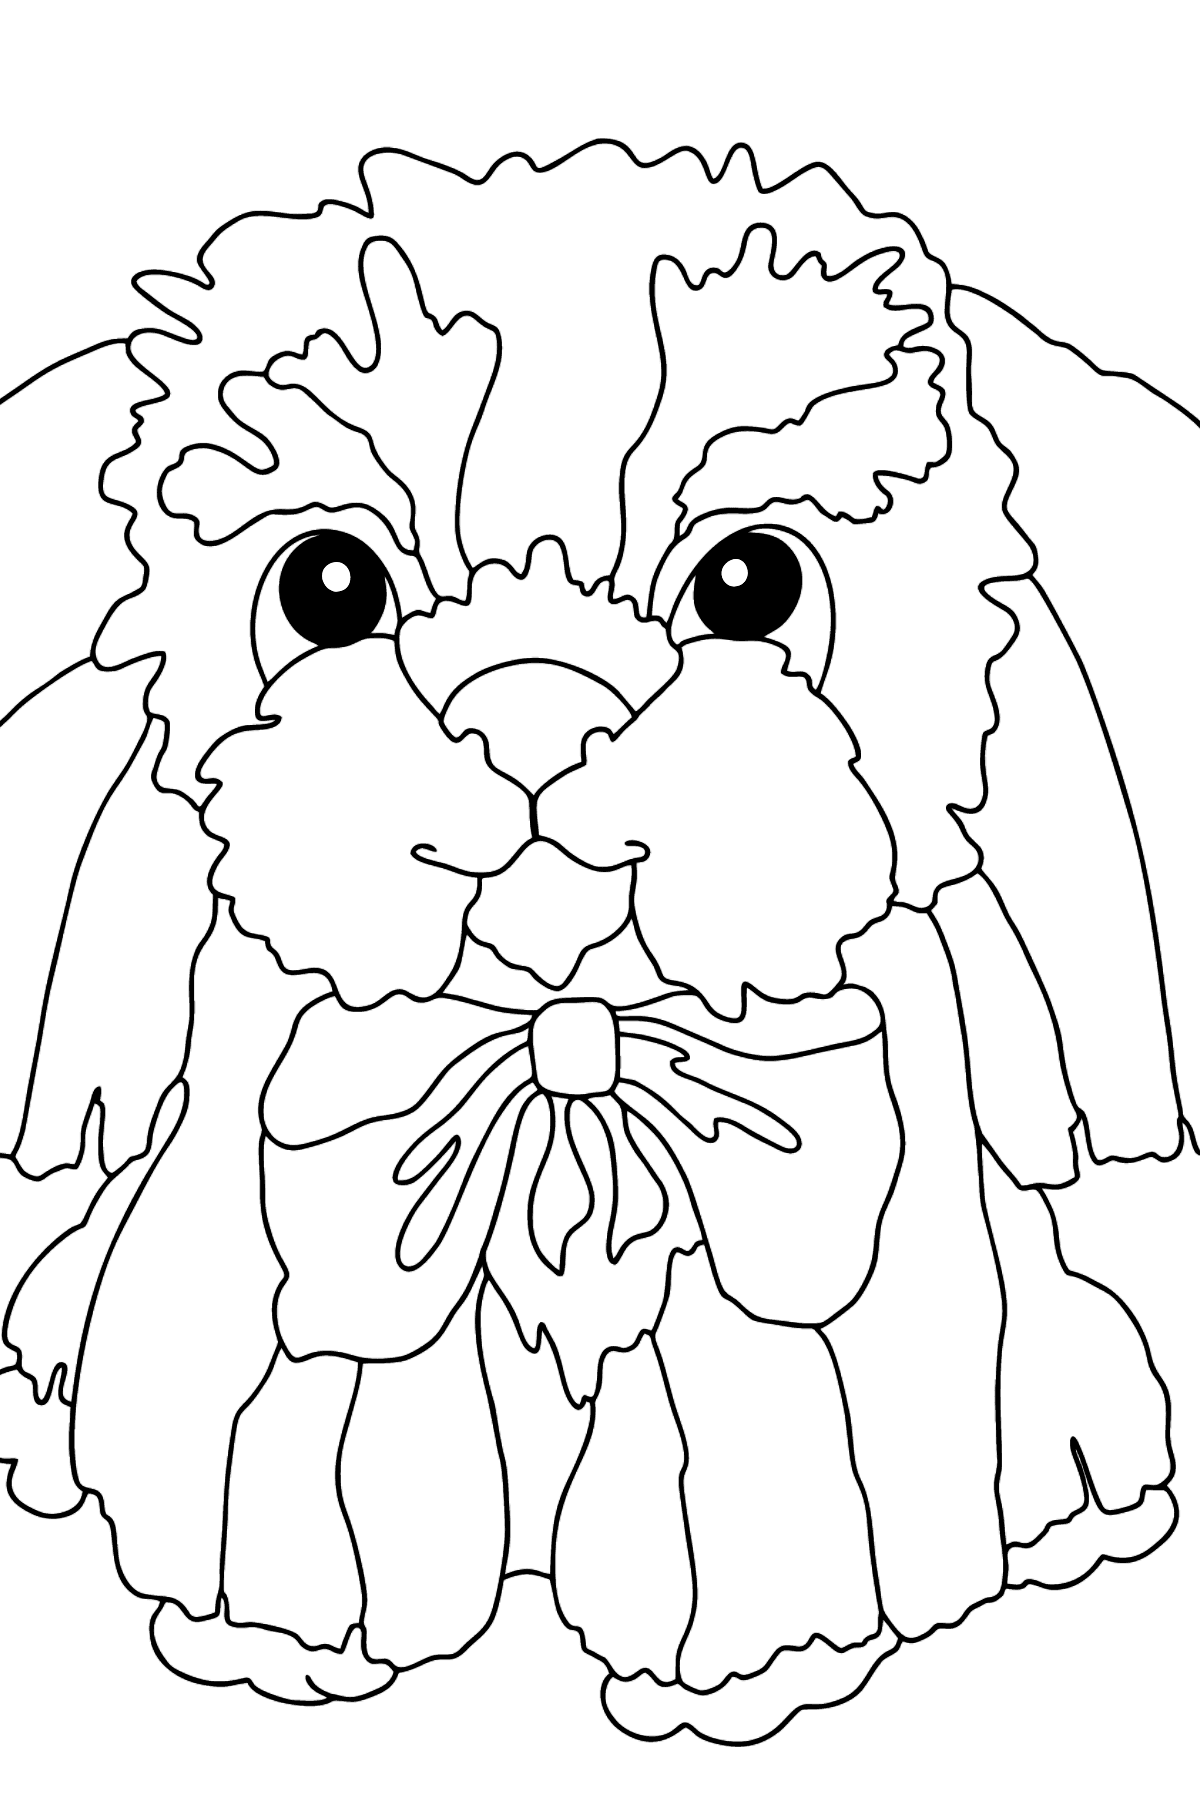 Coloring Page - A Young Fluffy Dog - Coloring Pages for Kids